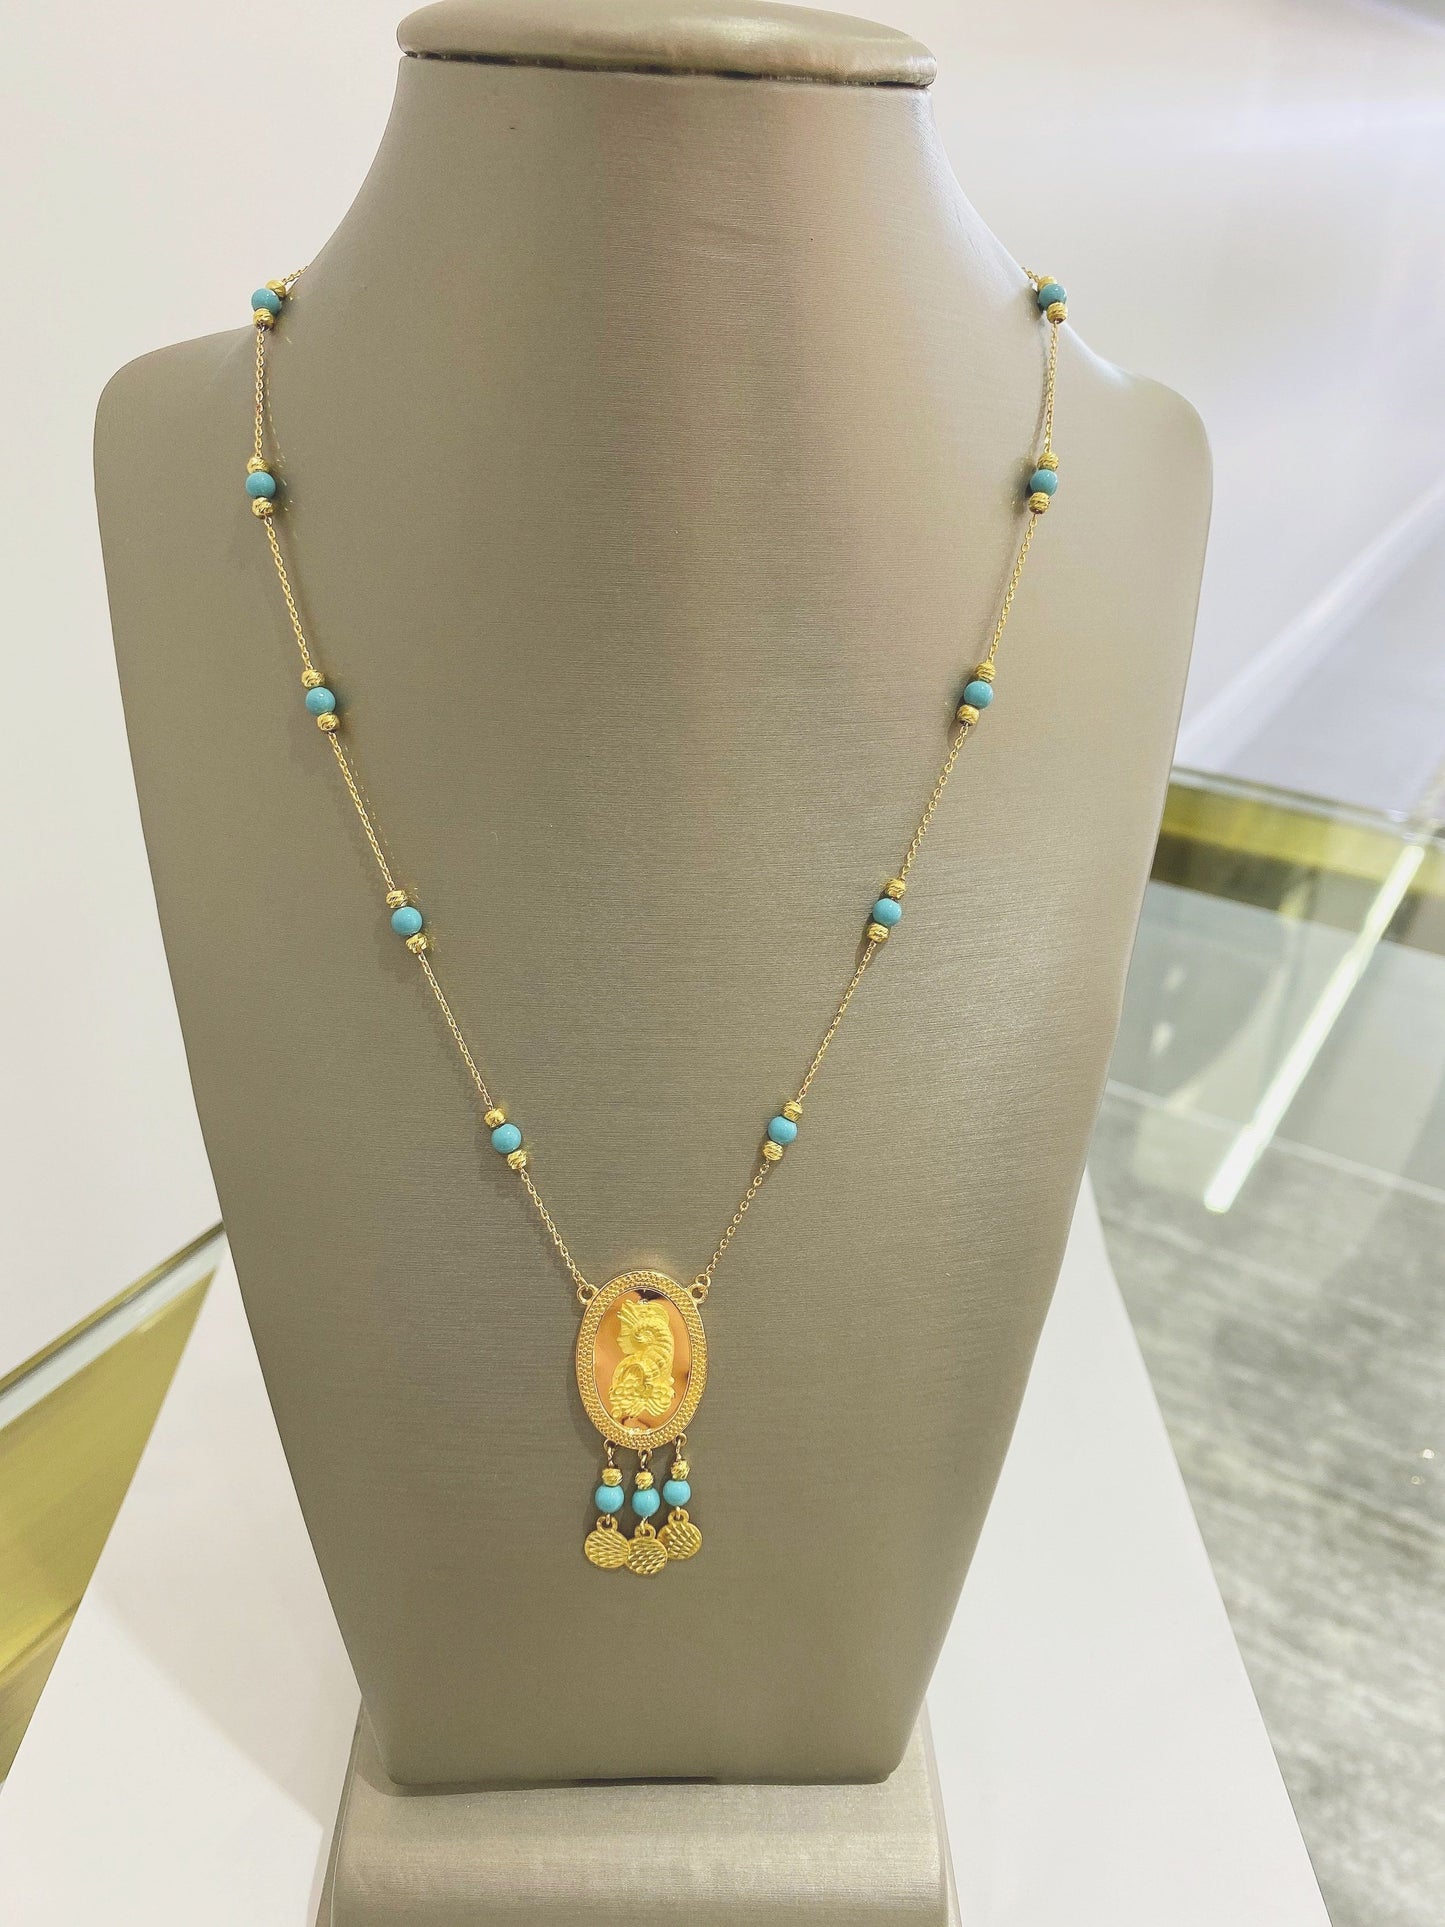 21k Gold Turquoise Necklace